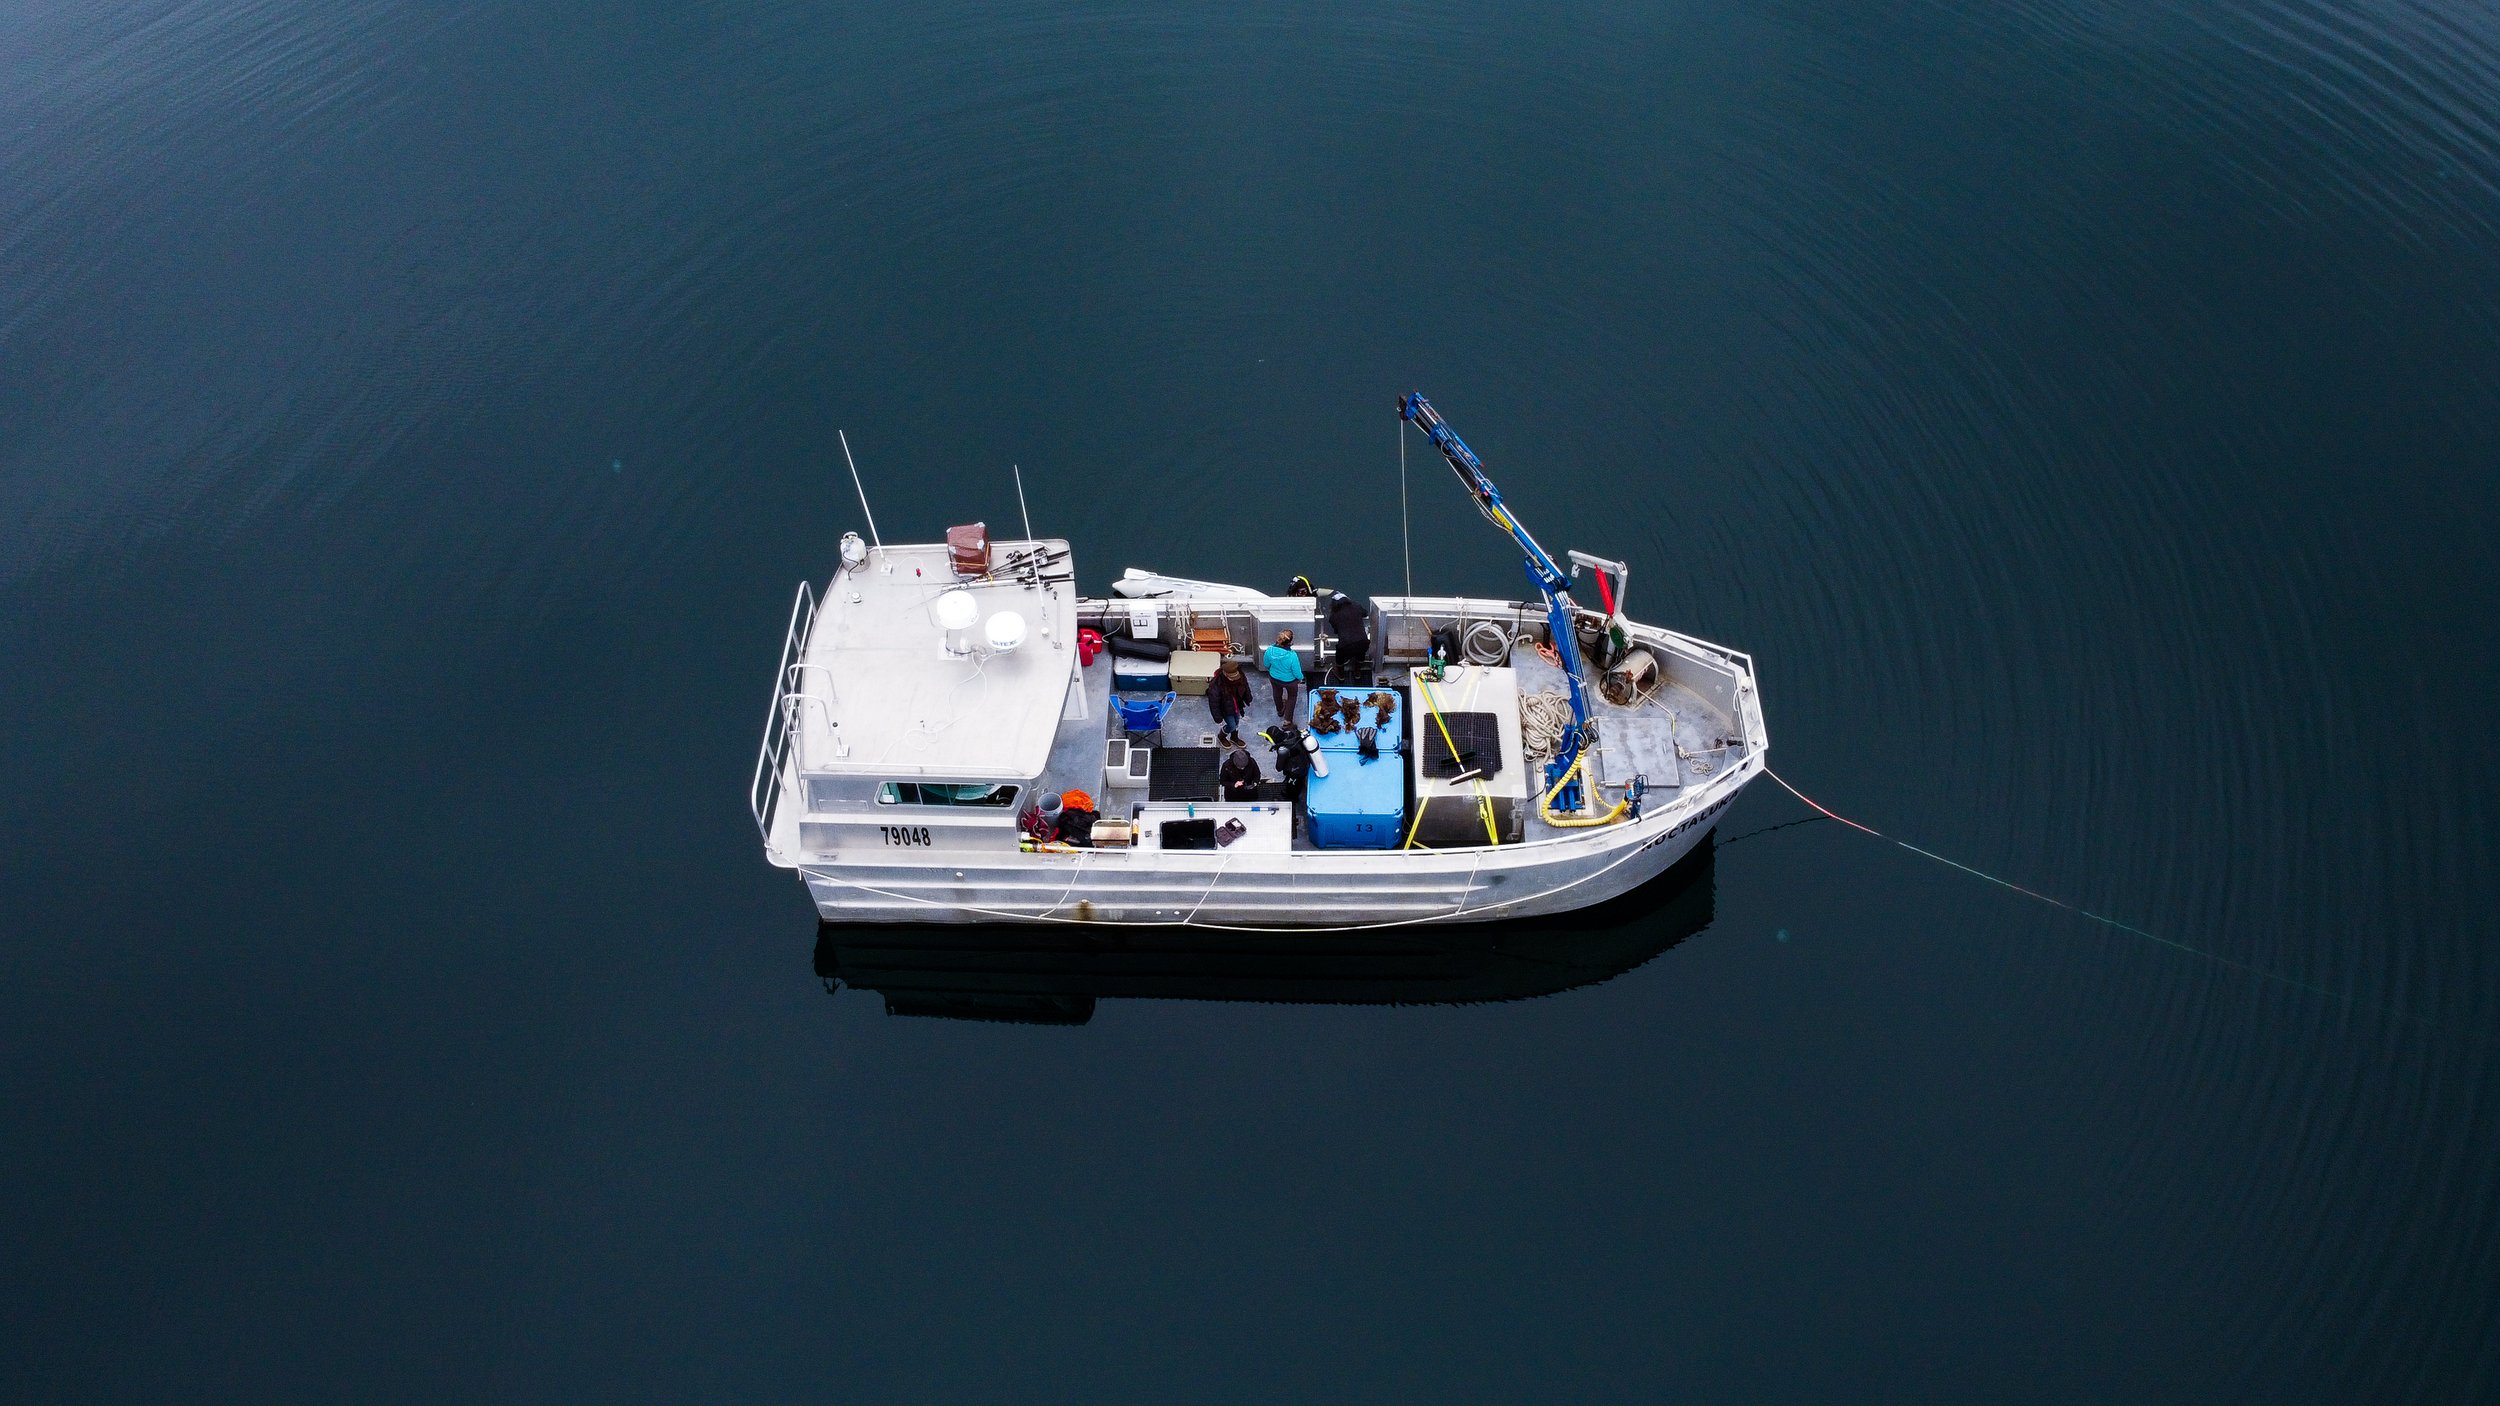 The Native Conservancy team dives for various kelp varieties to propagate off their boat, the Noktaluka, in the Prince William Sound.